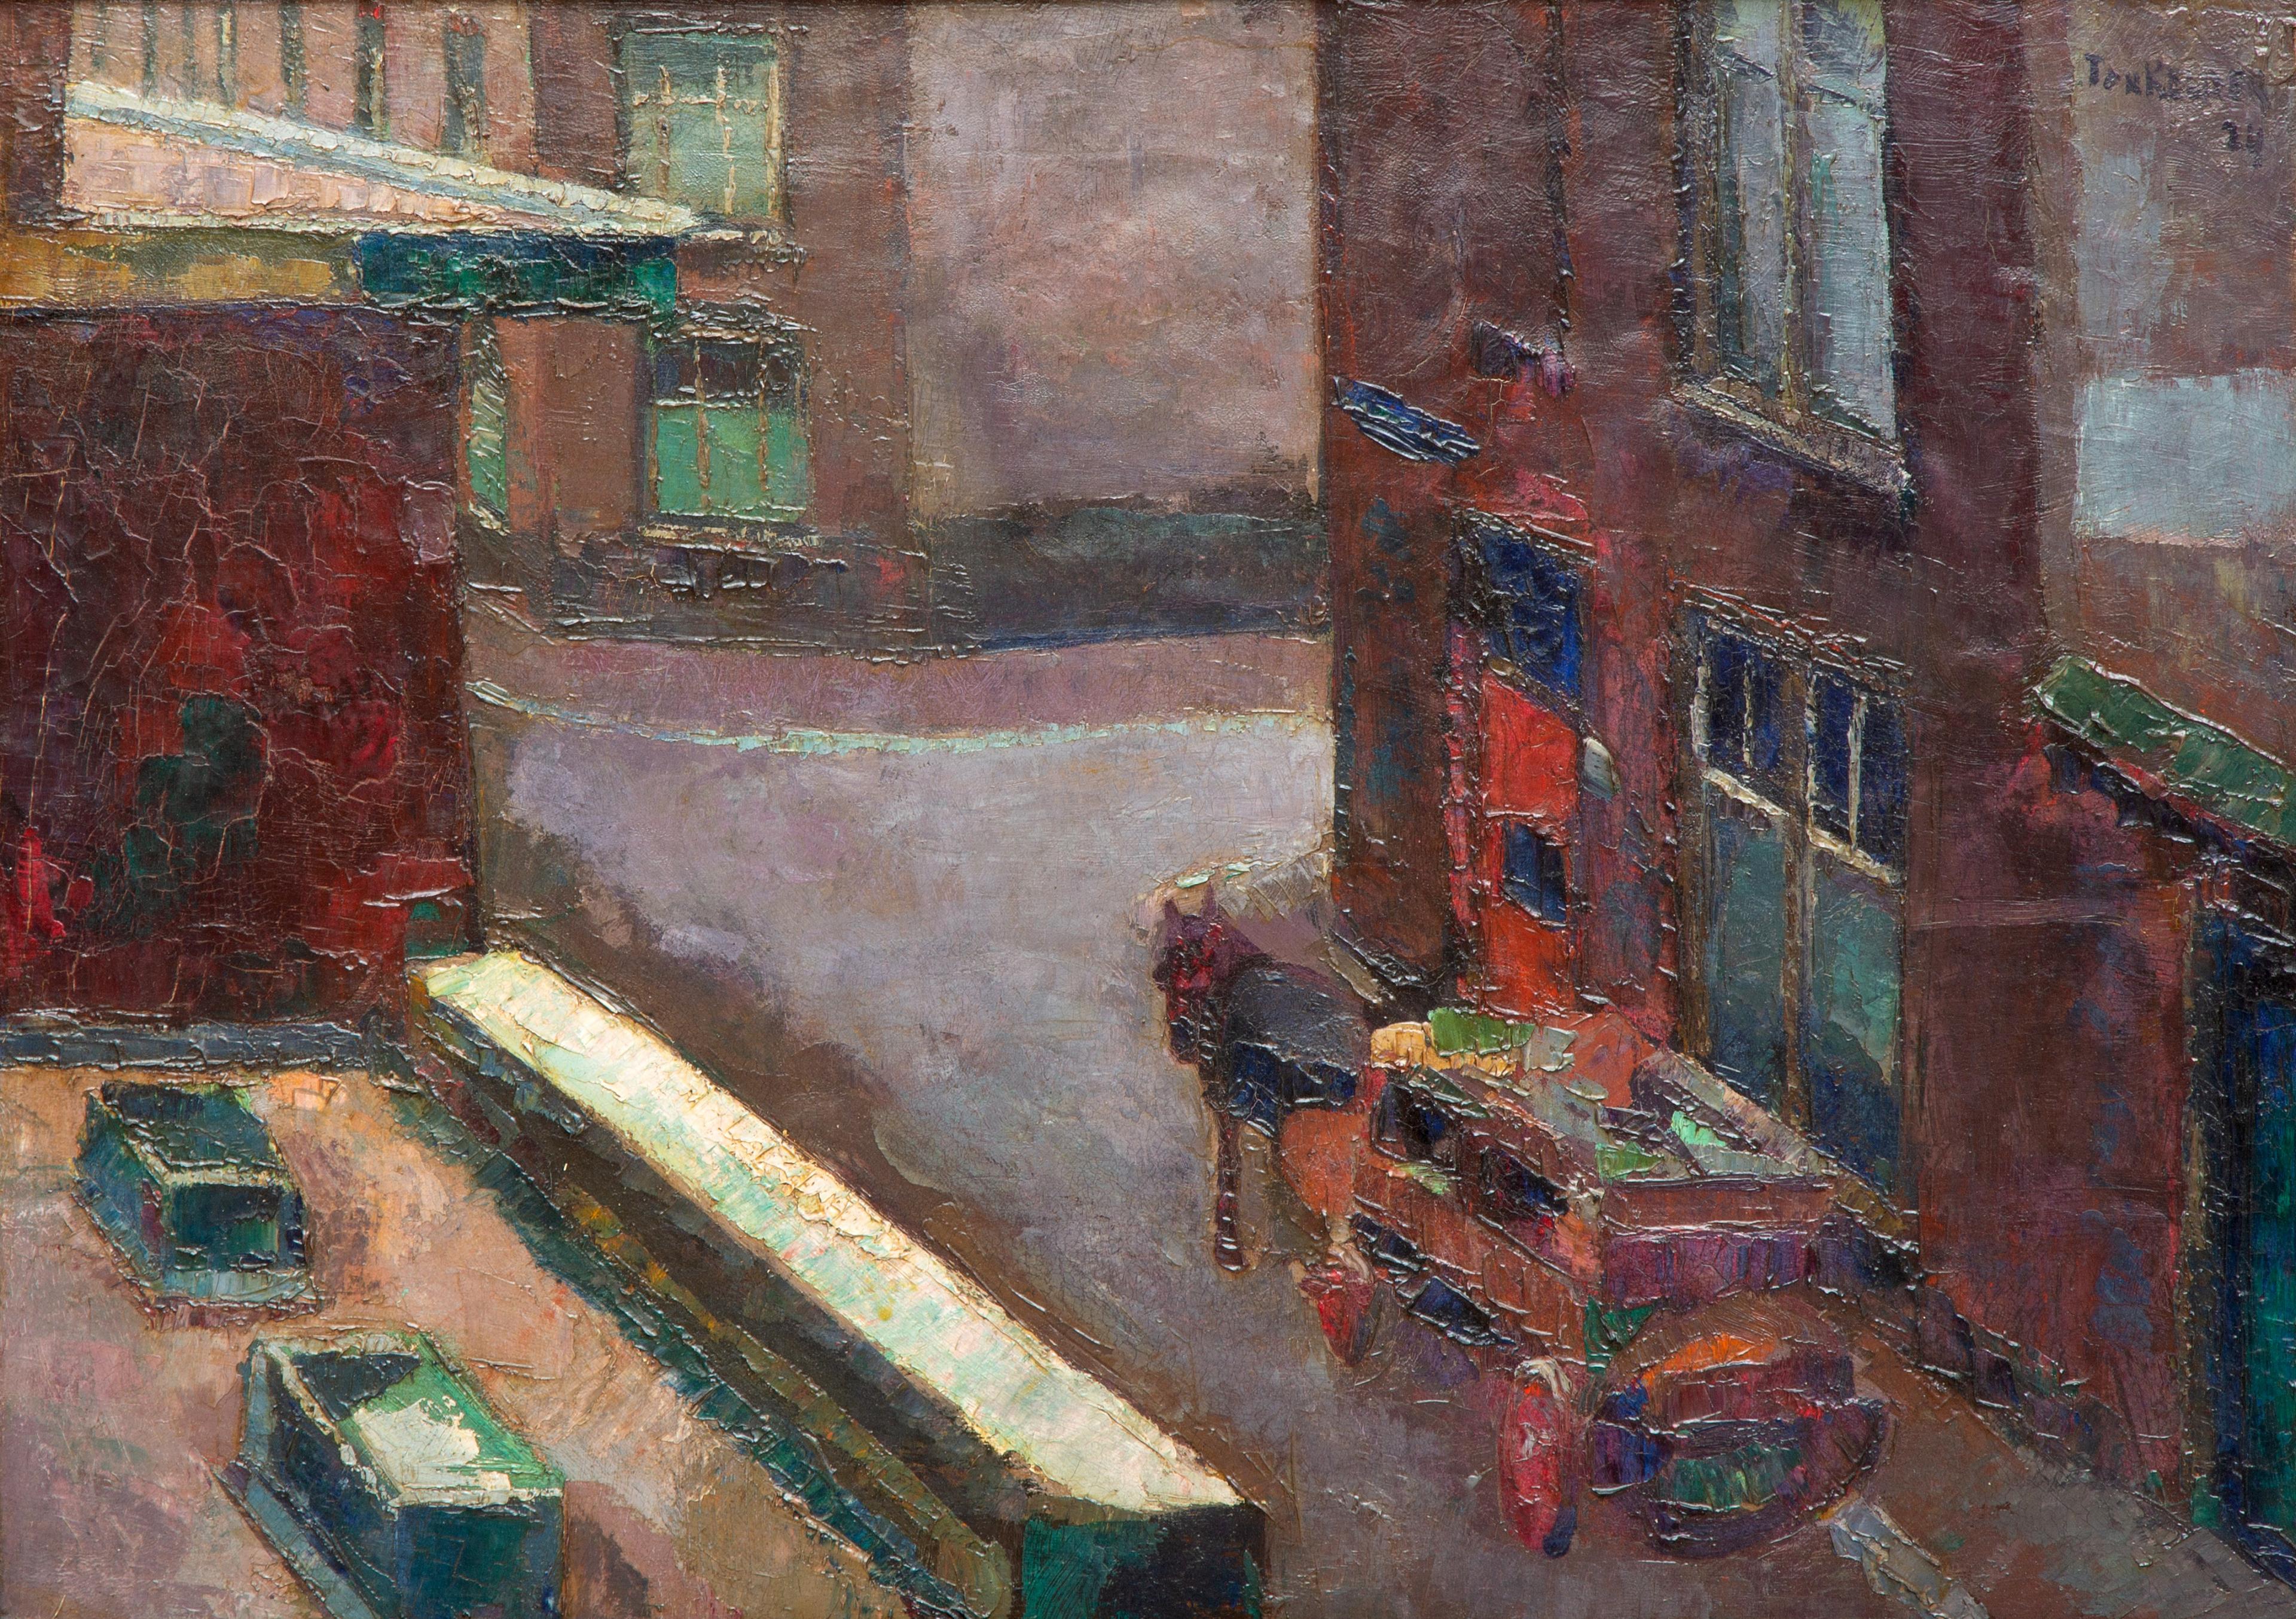 A view from the artist's studio in The Hague